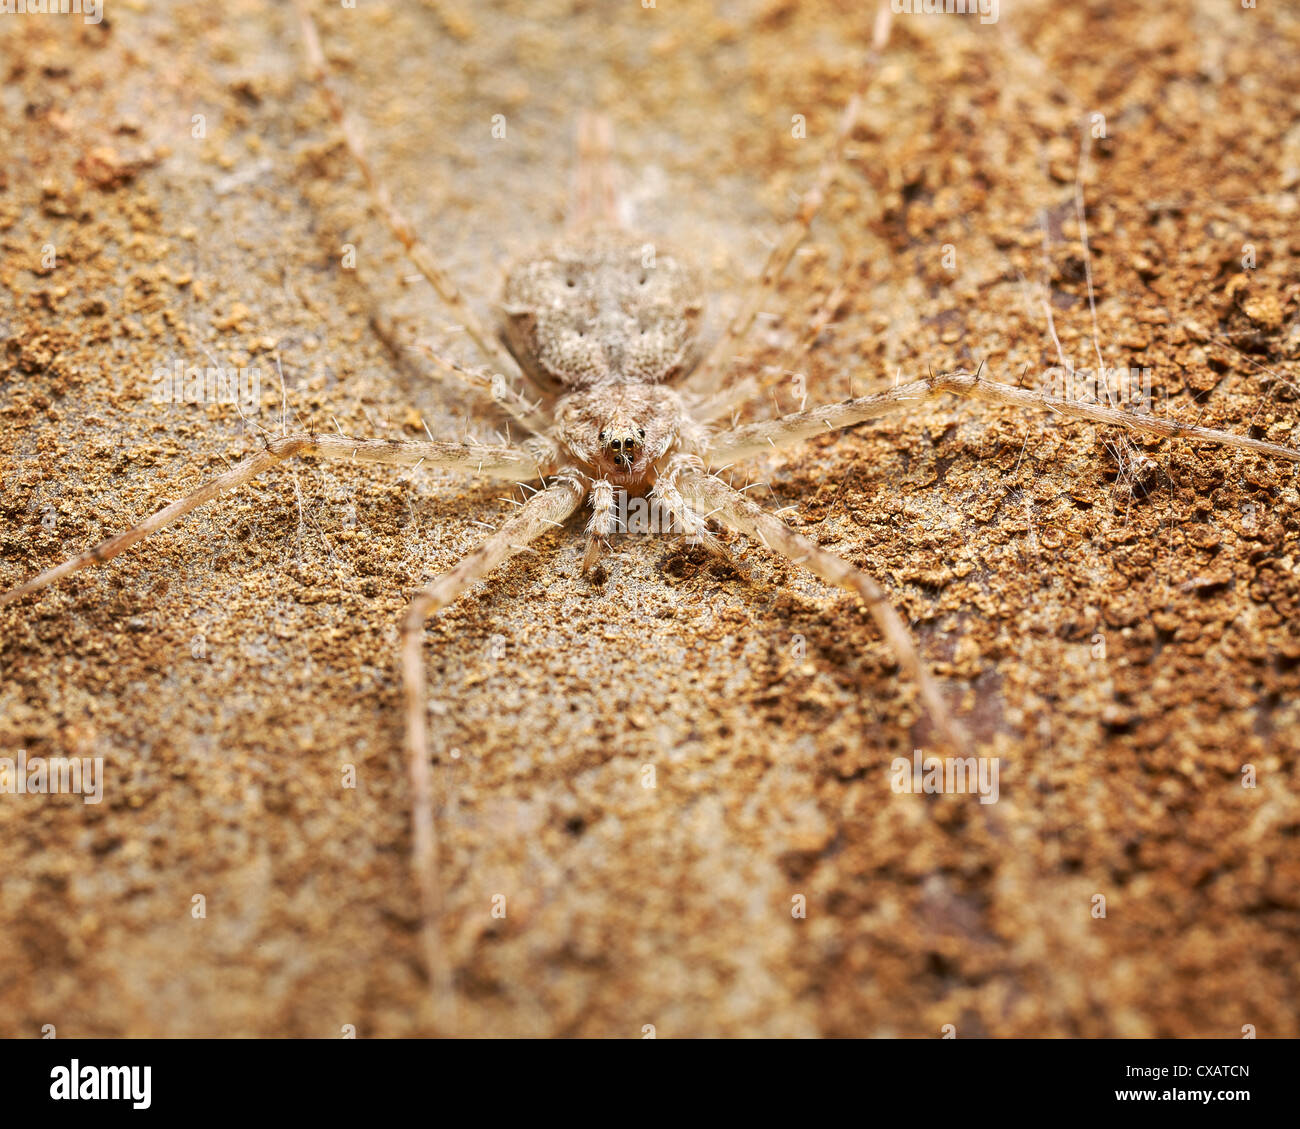 a twin tailed spider camouflaged on the bark of a tree Stock Photo